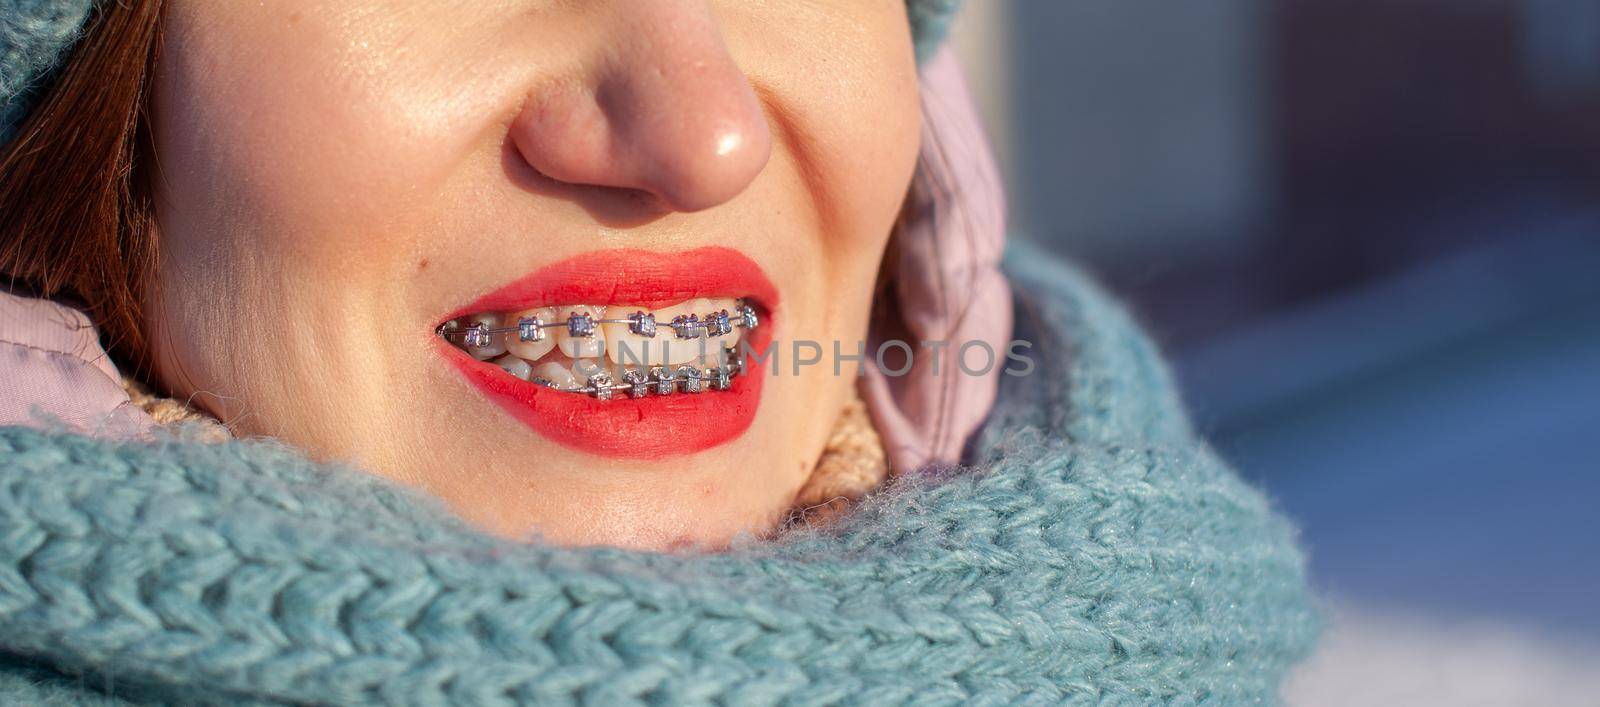 Girl on the street smiles and braces are visible on her teeth by AnatoliiFoto